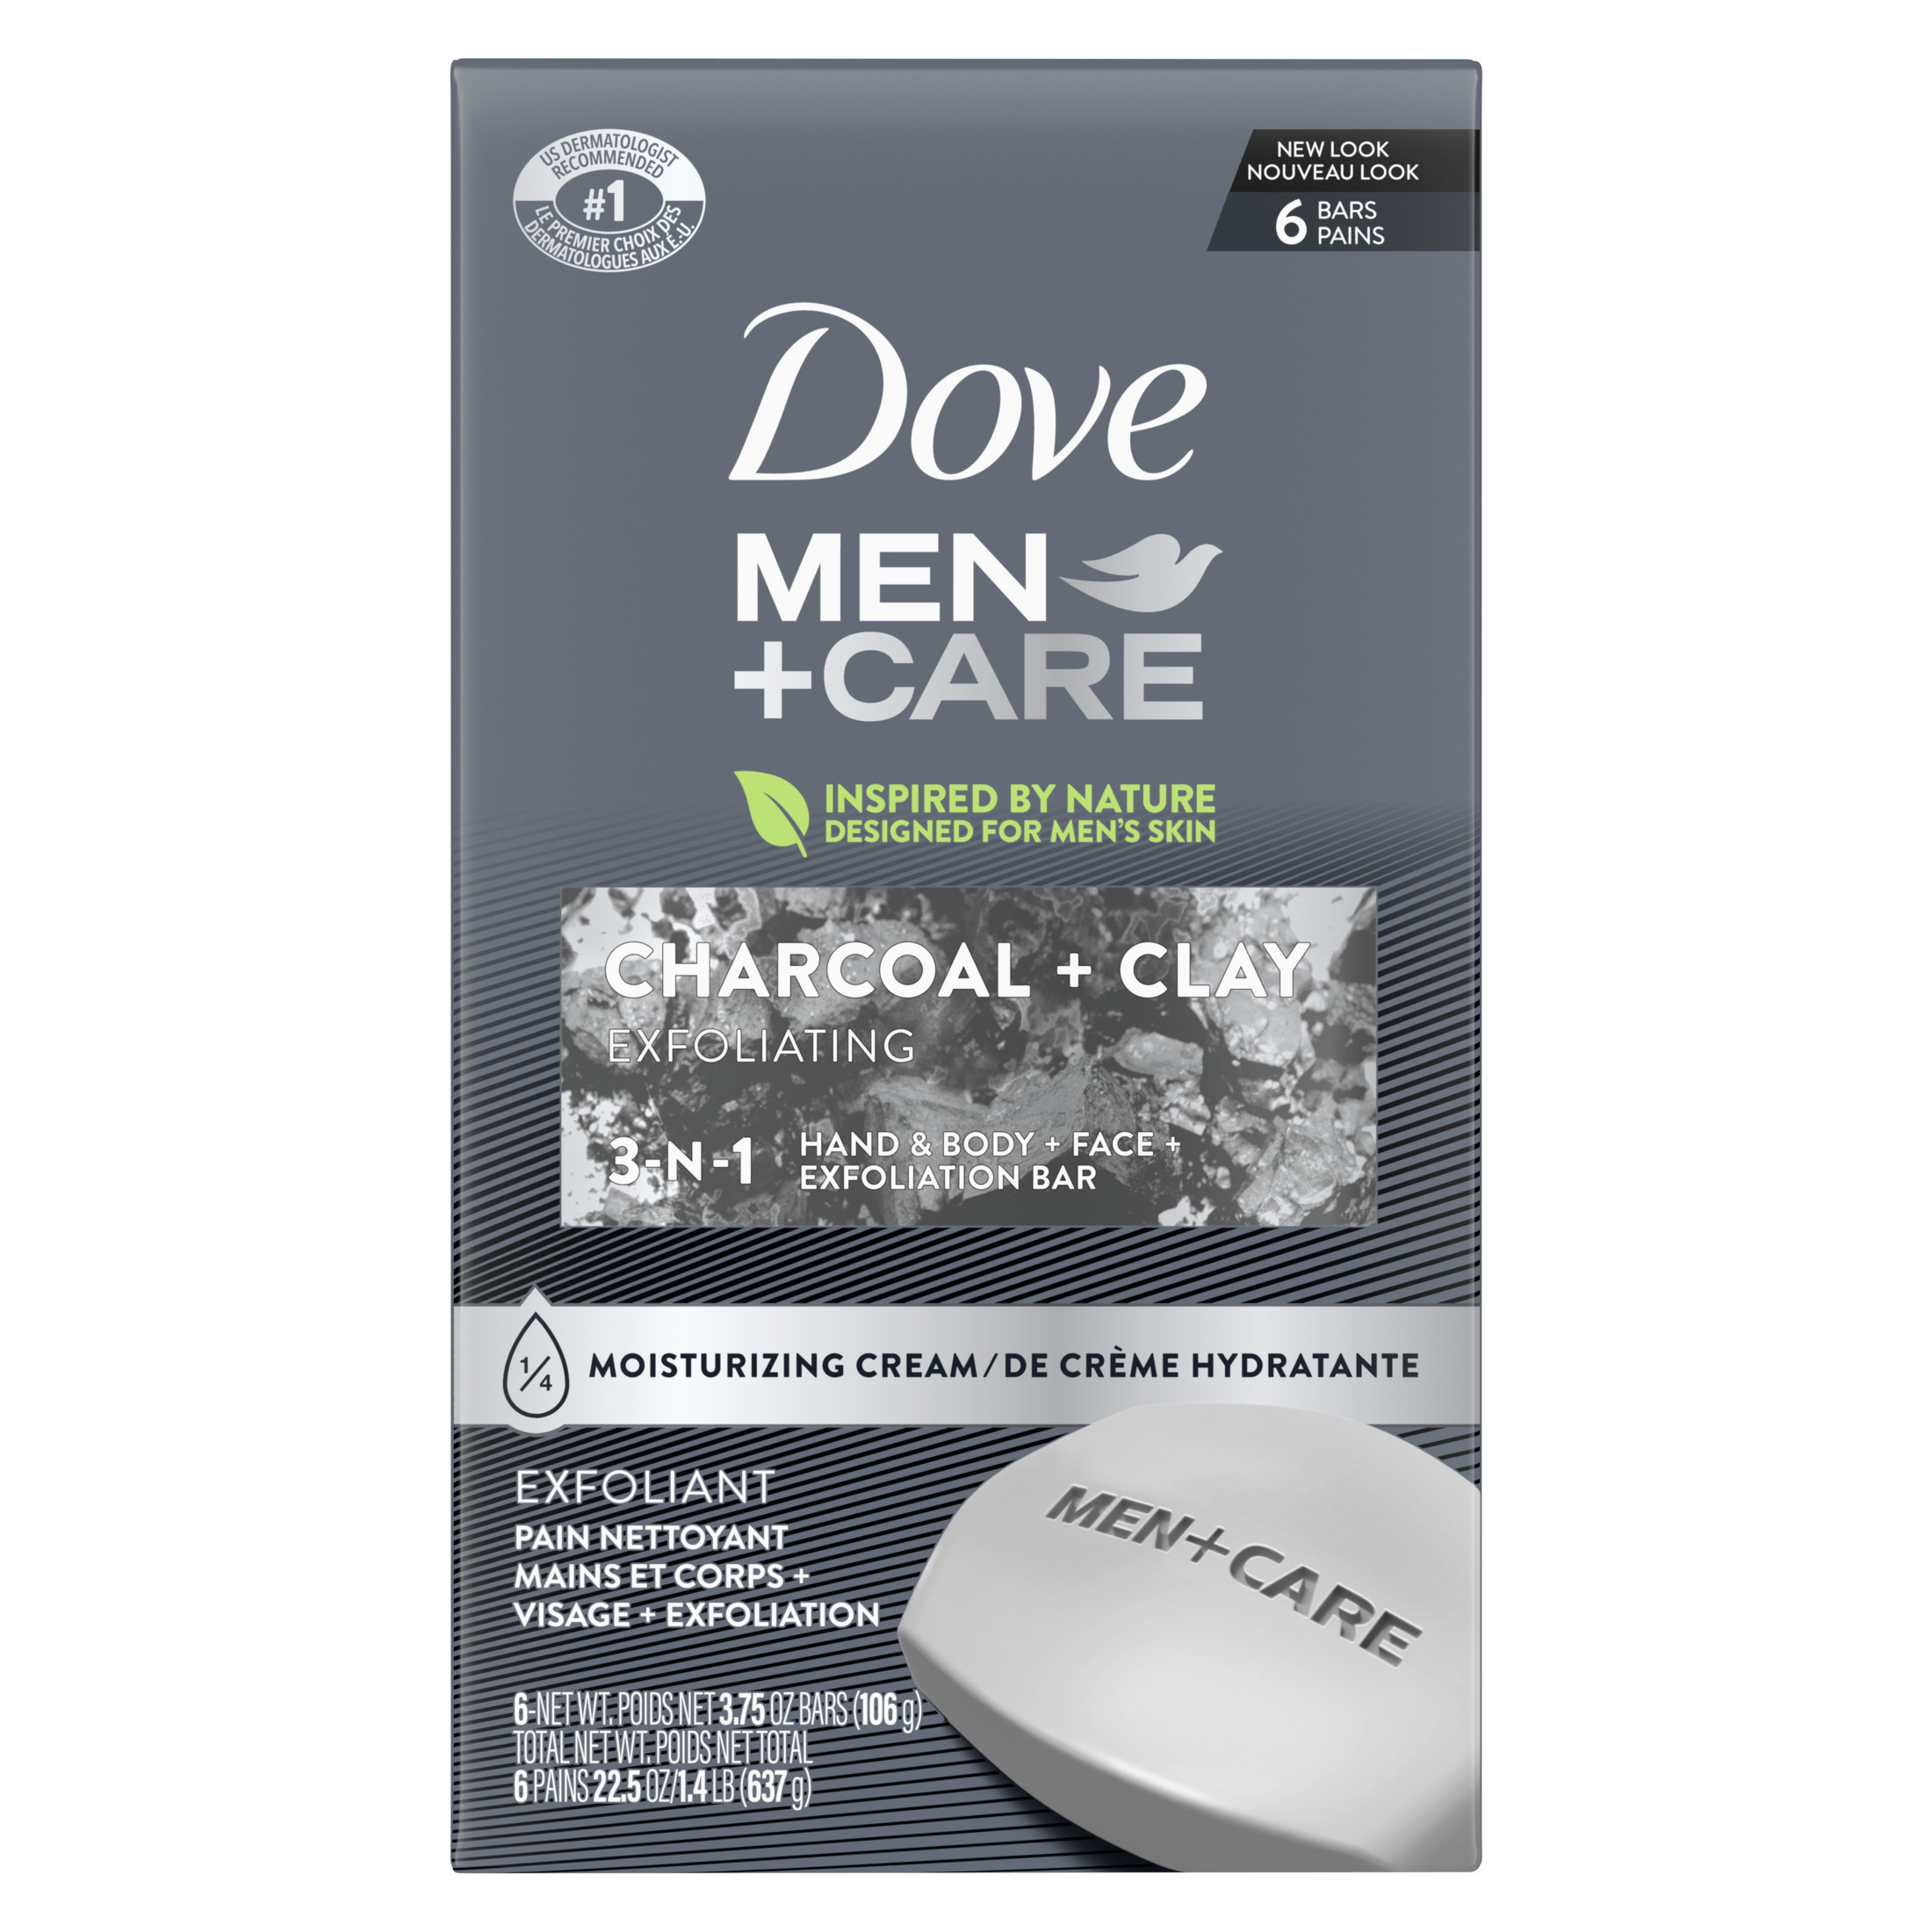 Dove Men+Care Elements Body and Face Bar Charcoal + Clay 3.75 oz, 6 Bar - image 1 of 7